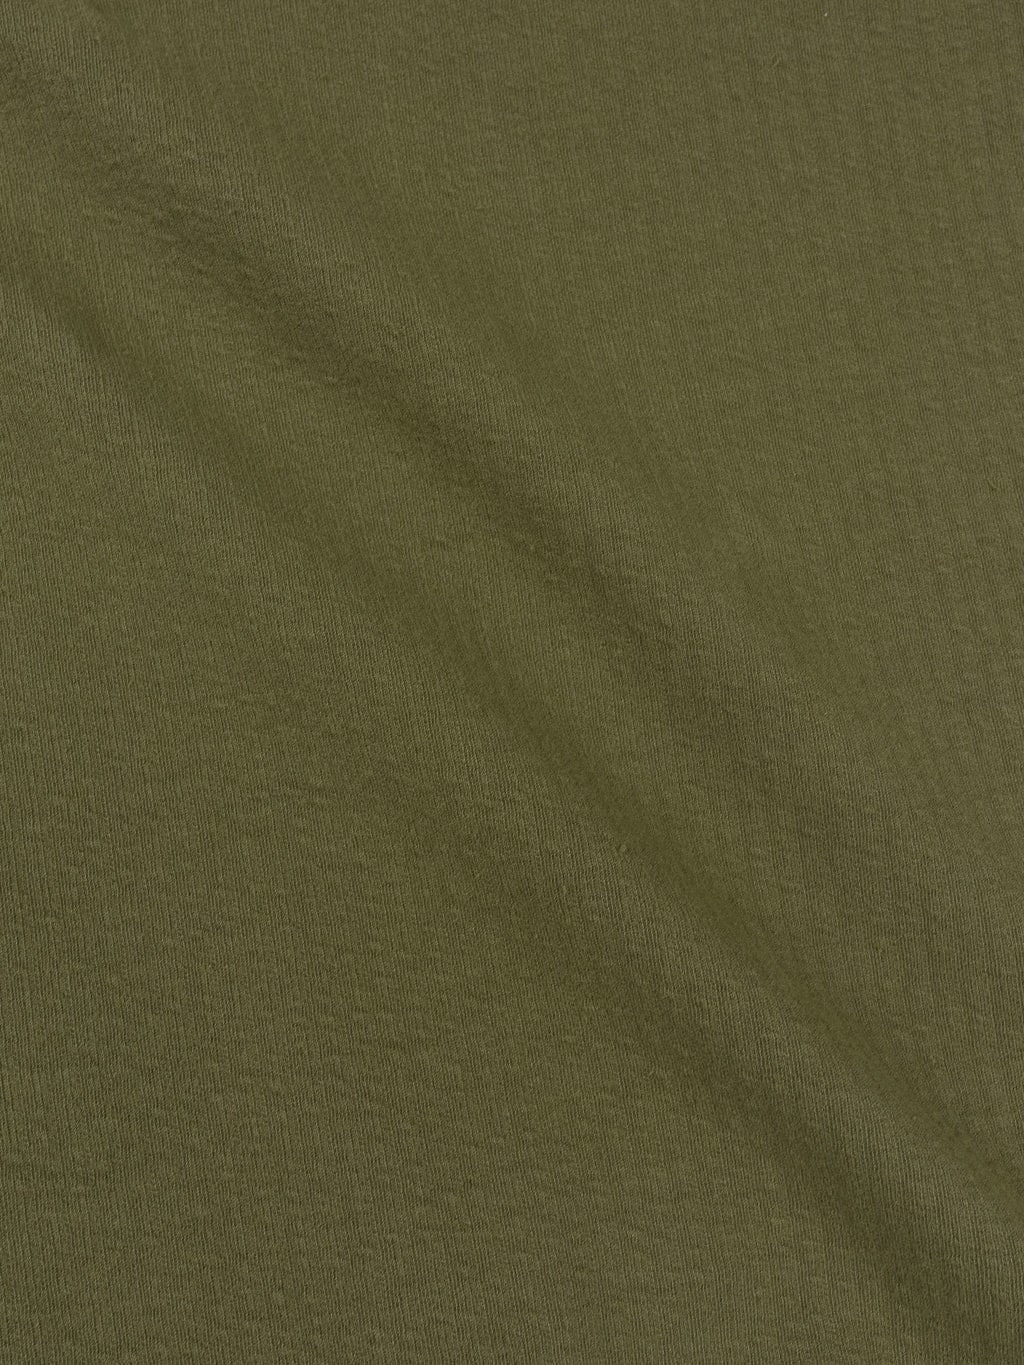 Loop Weft Double Face Jacquard henley Thermal army olive  100 cotton